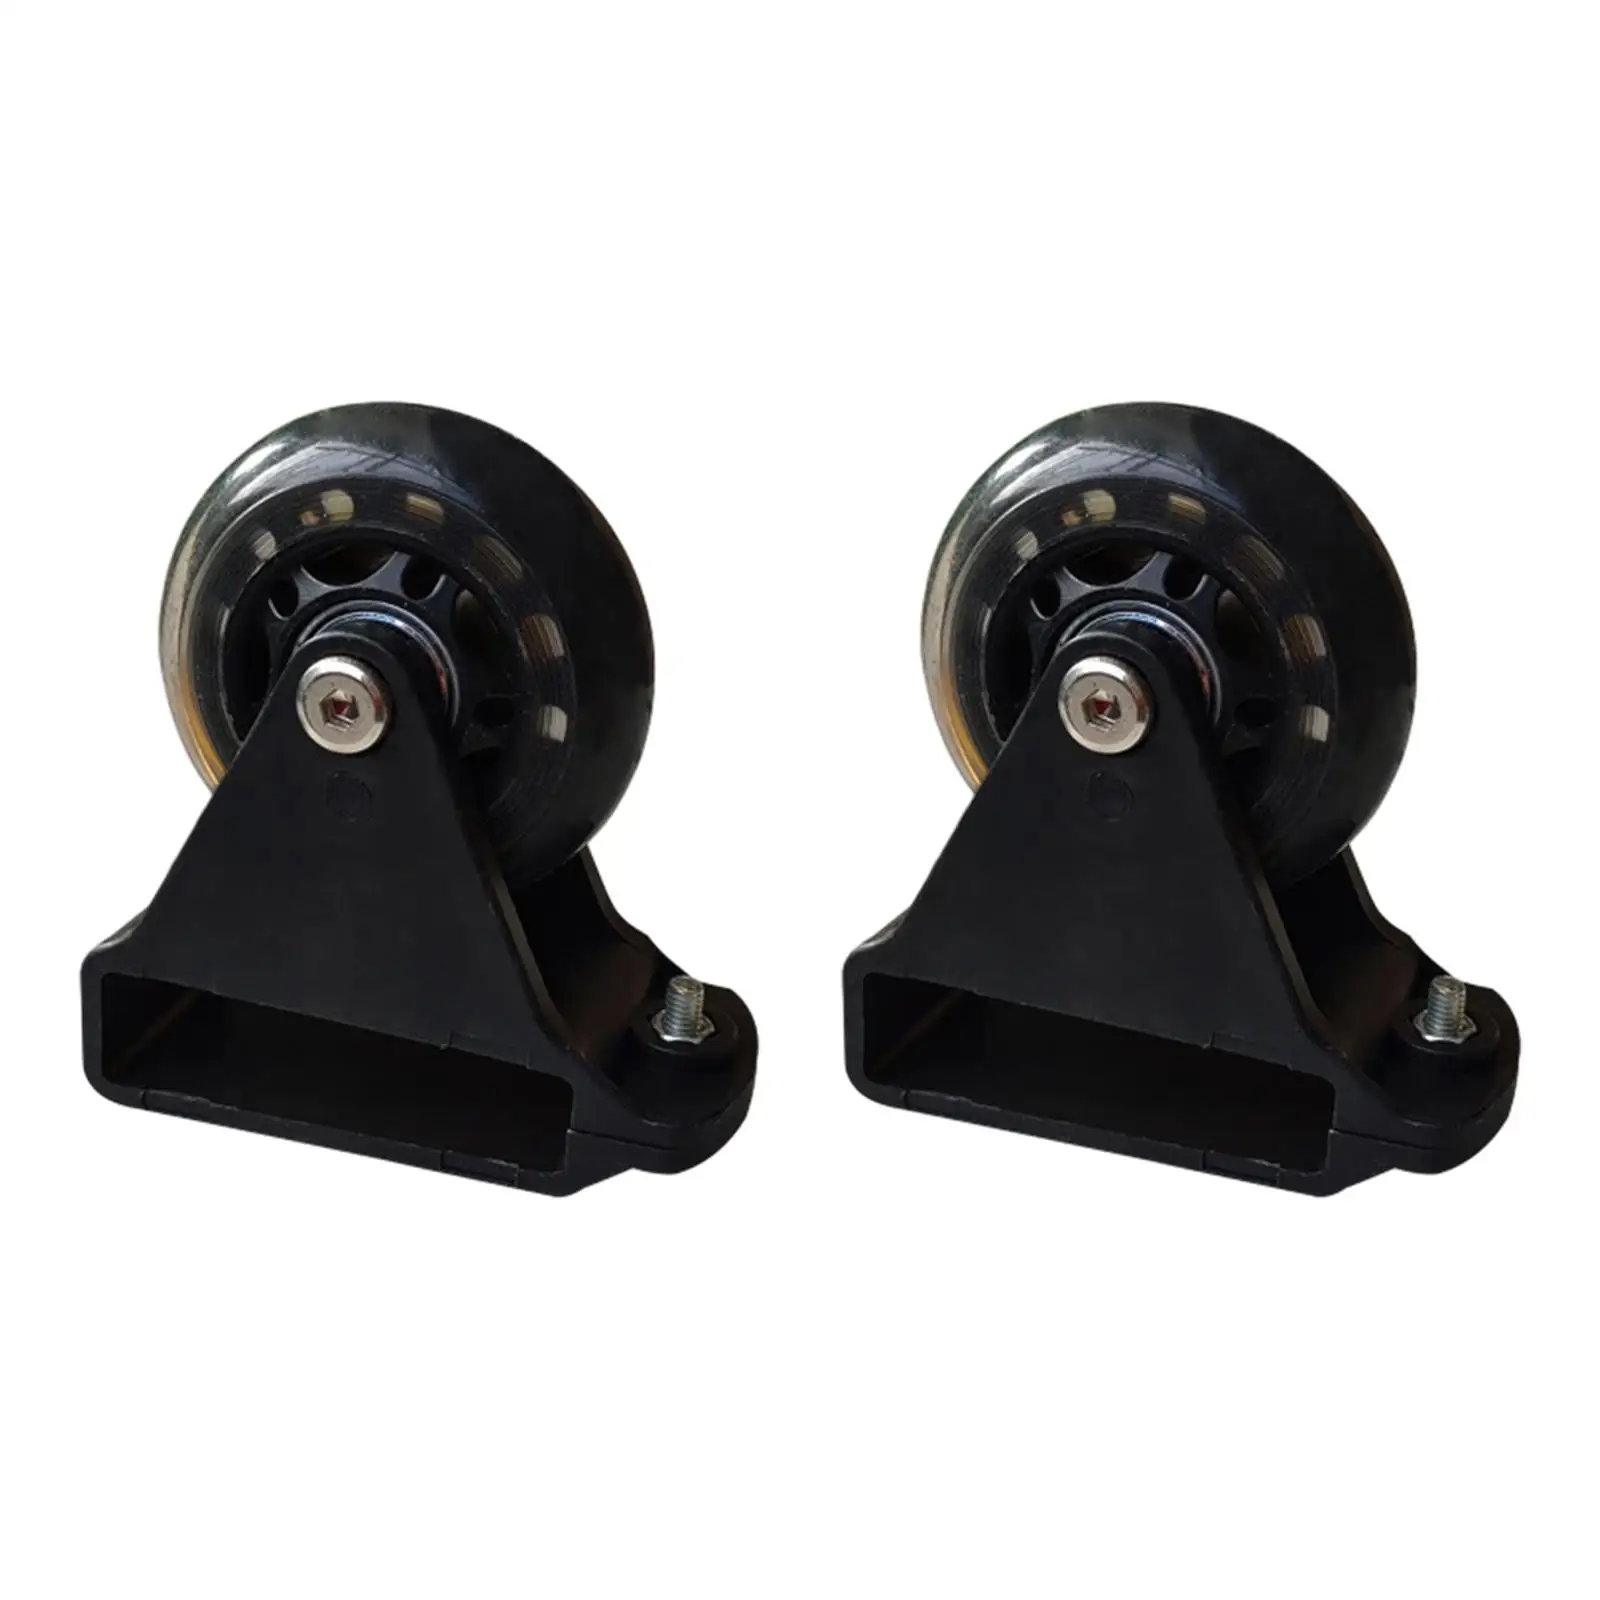 2 Pieces Leveling Casters Black Replacement Ladder Accessories Ladder Balance Bar Wheels for Equipment Shelves Machine Workbench